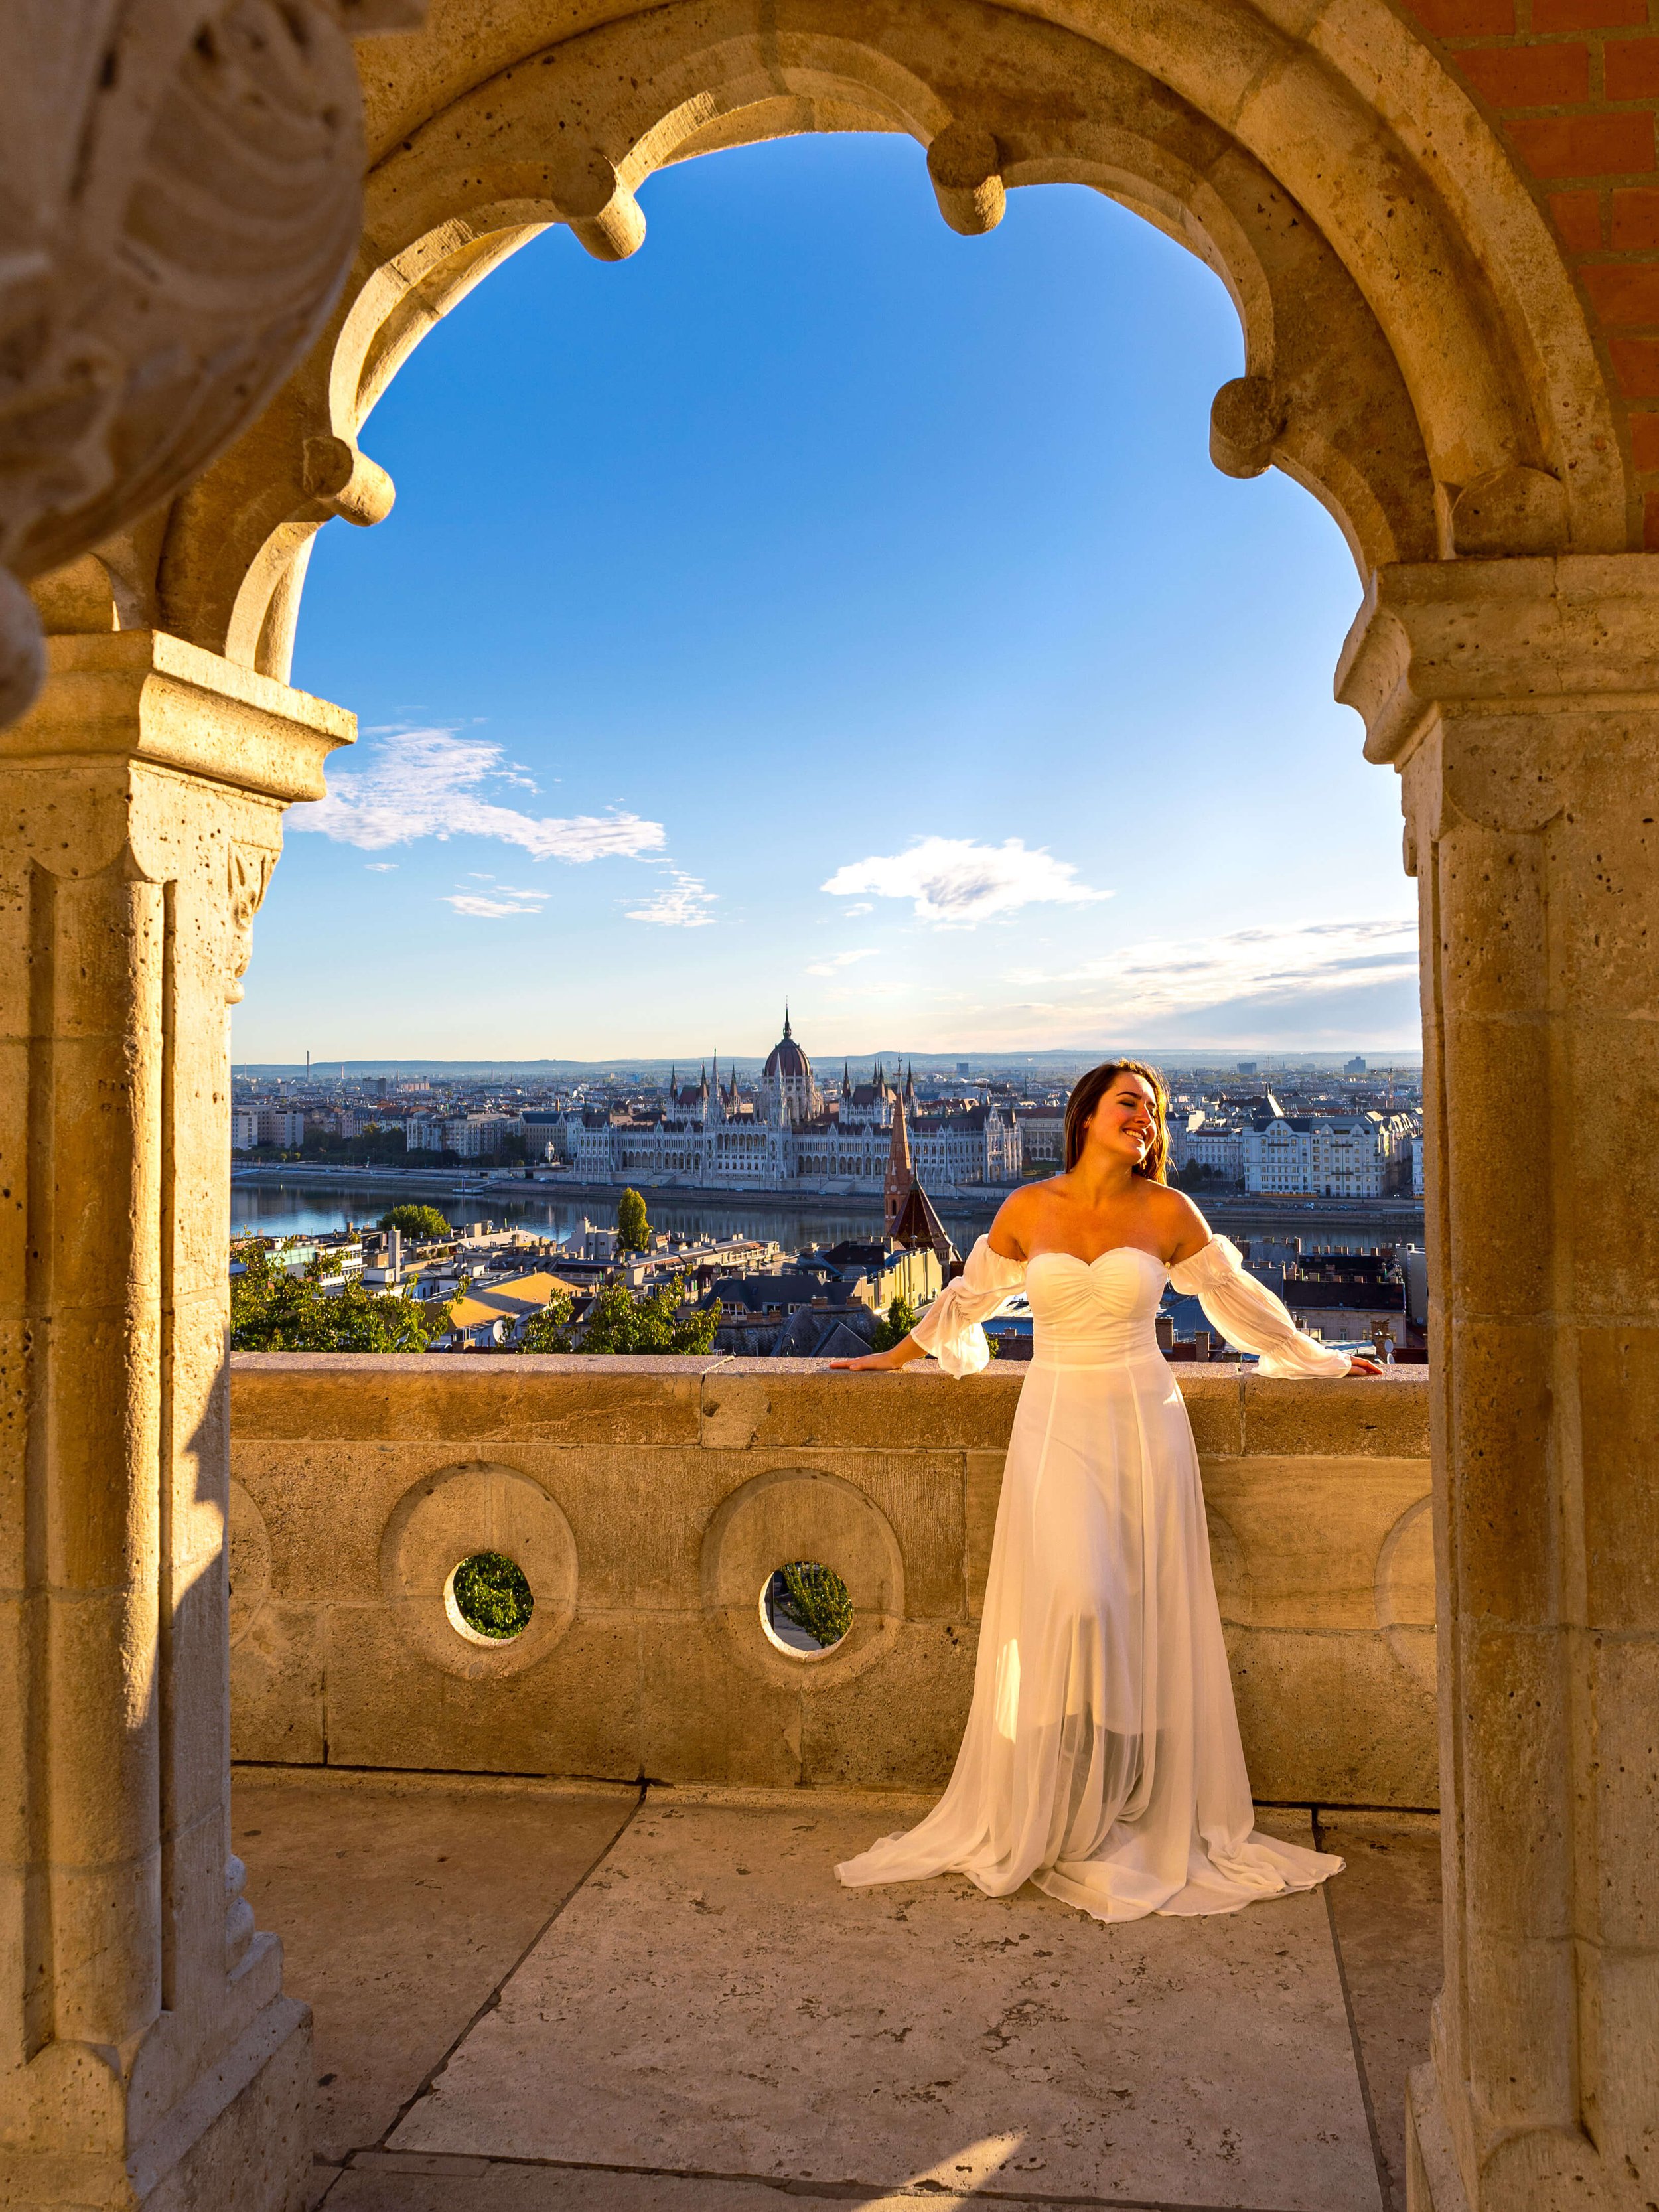 woman on balcony at fishermans bastion overlooking danube budapest hungary.jpg